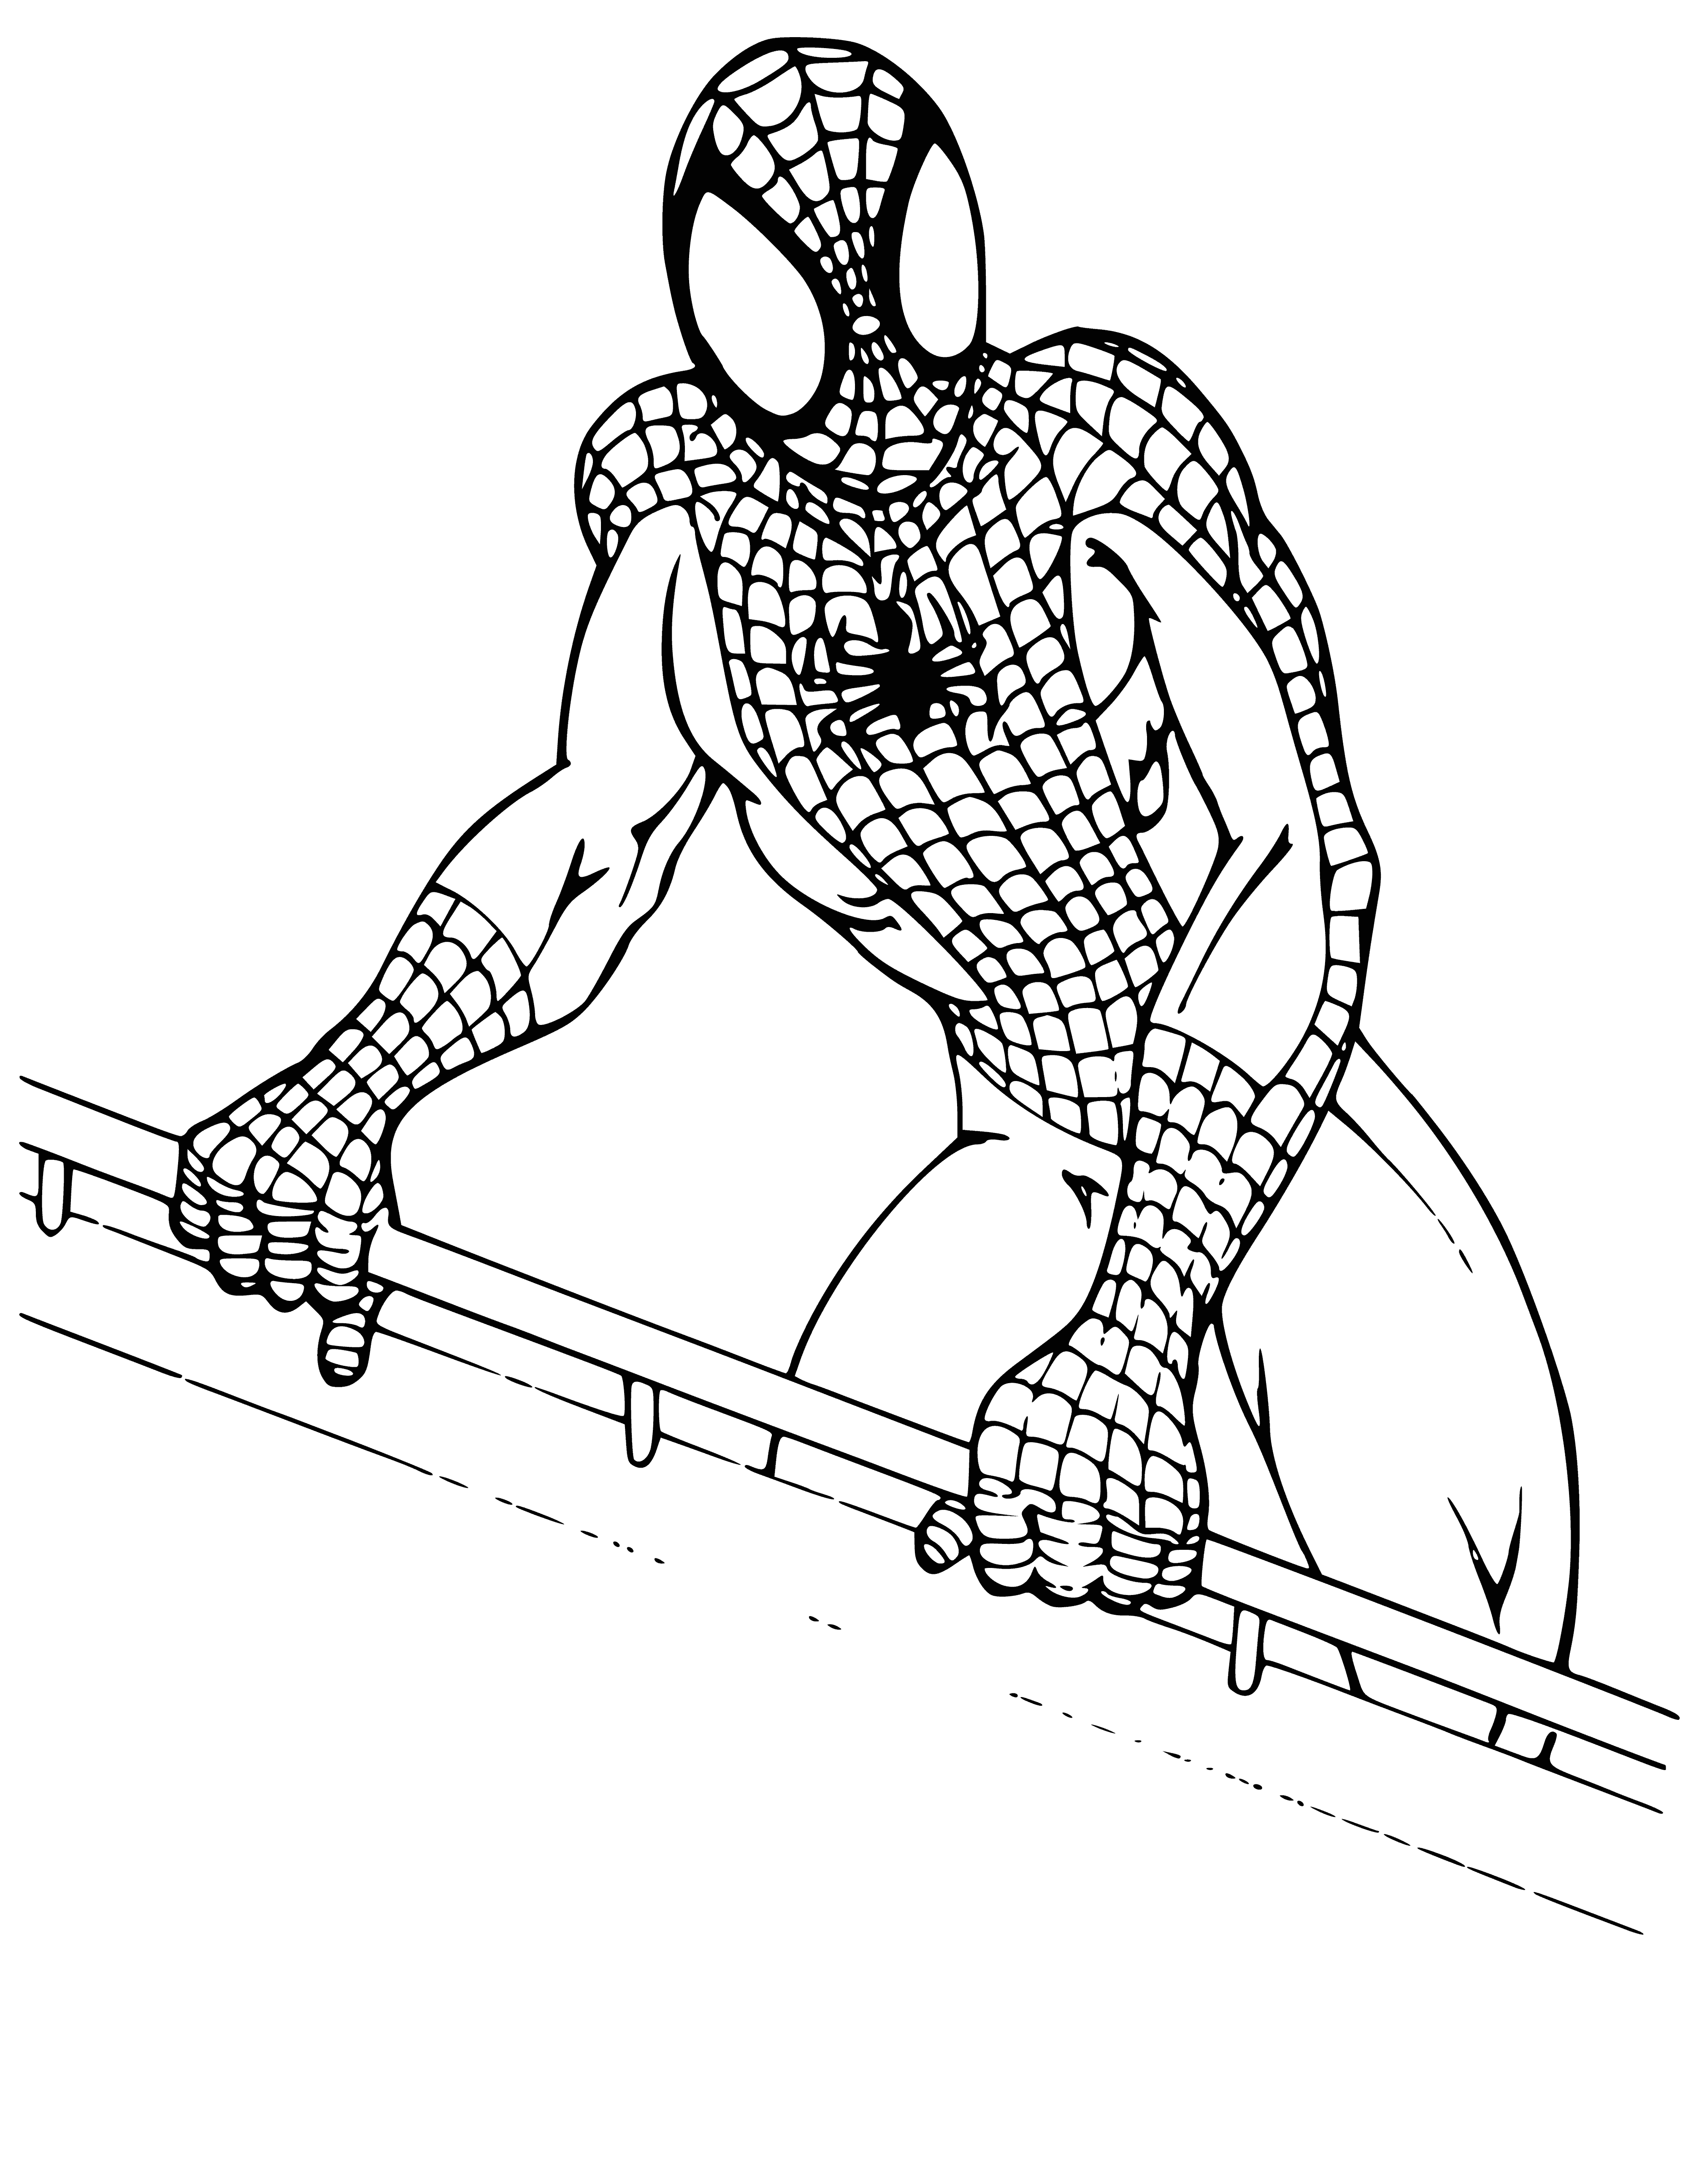 Spiderman coloring page